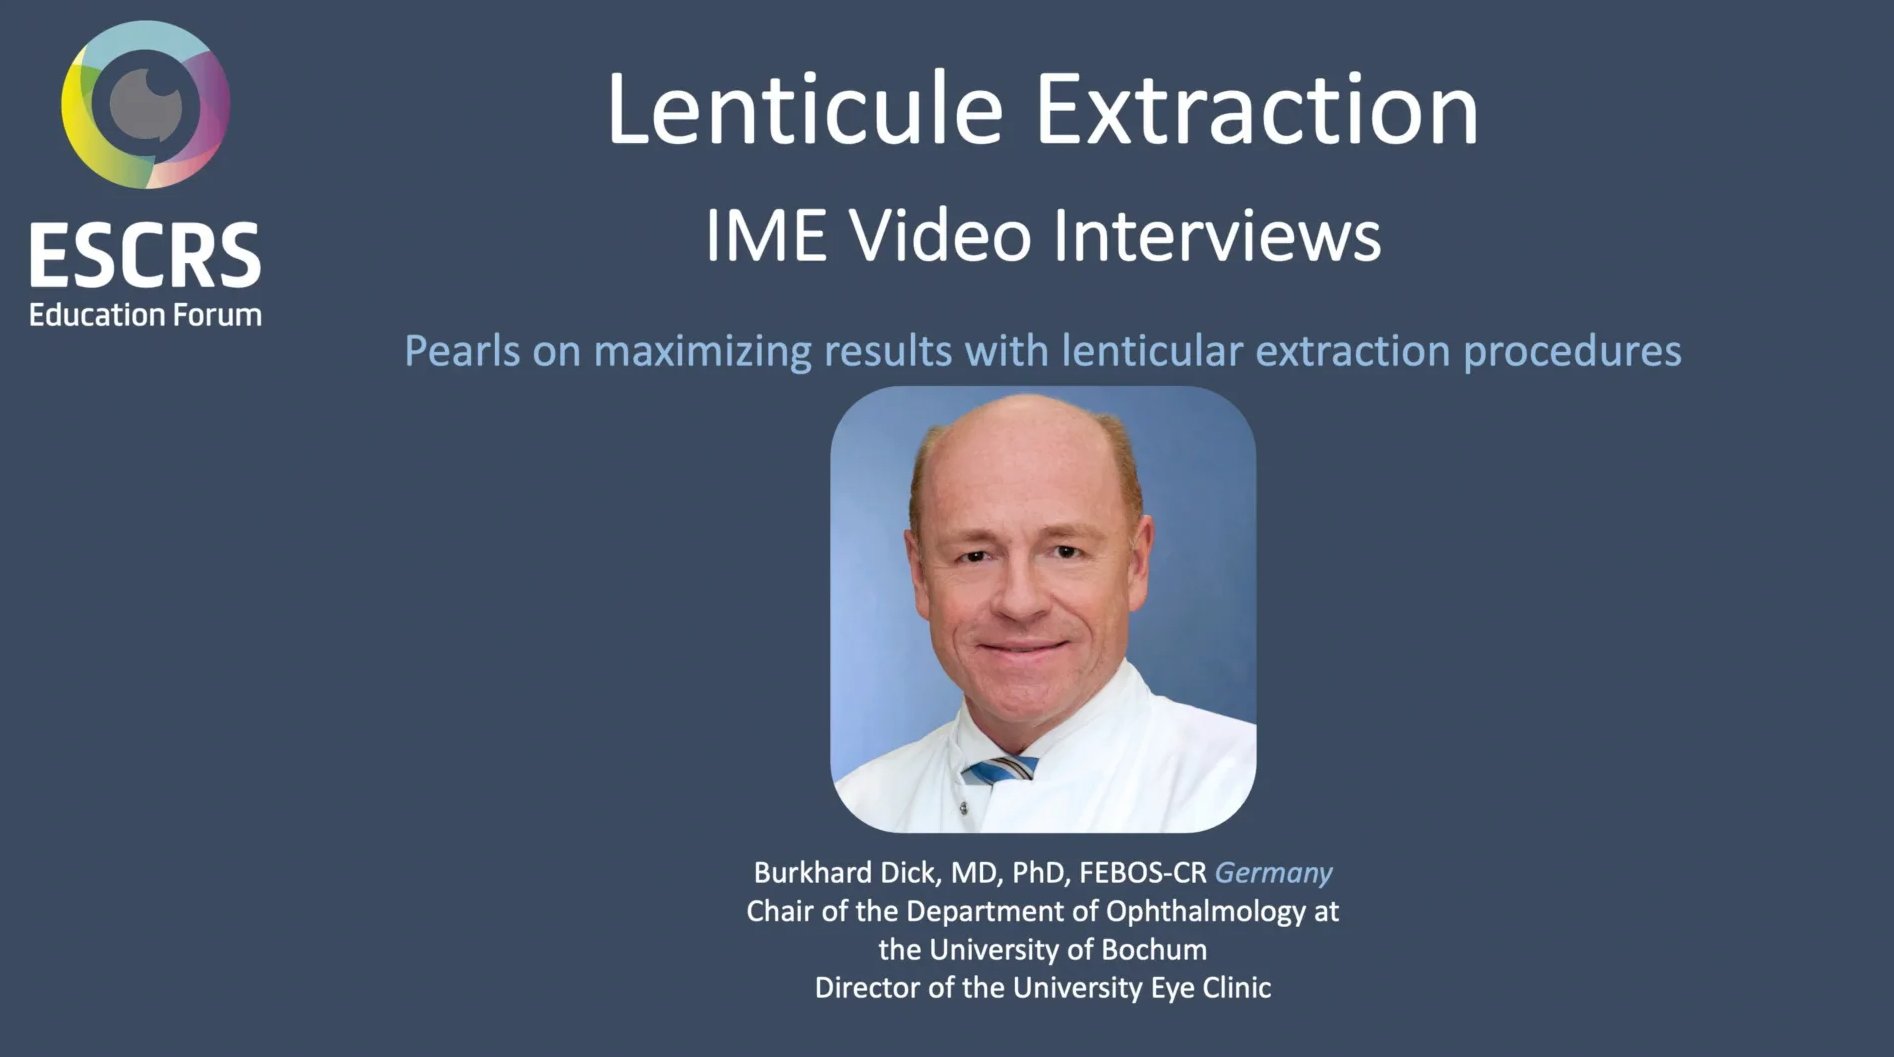 Podcast Interviews: Lenticule Extraction - Burkhard Dick